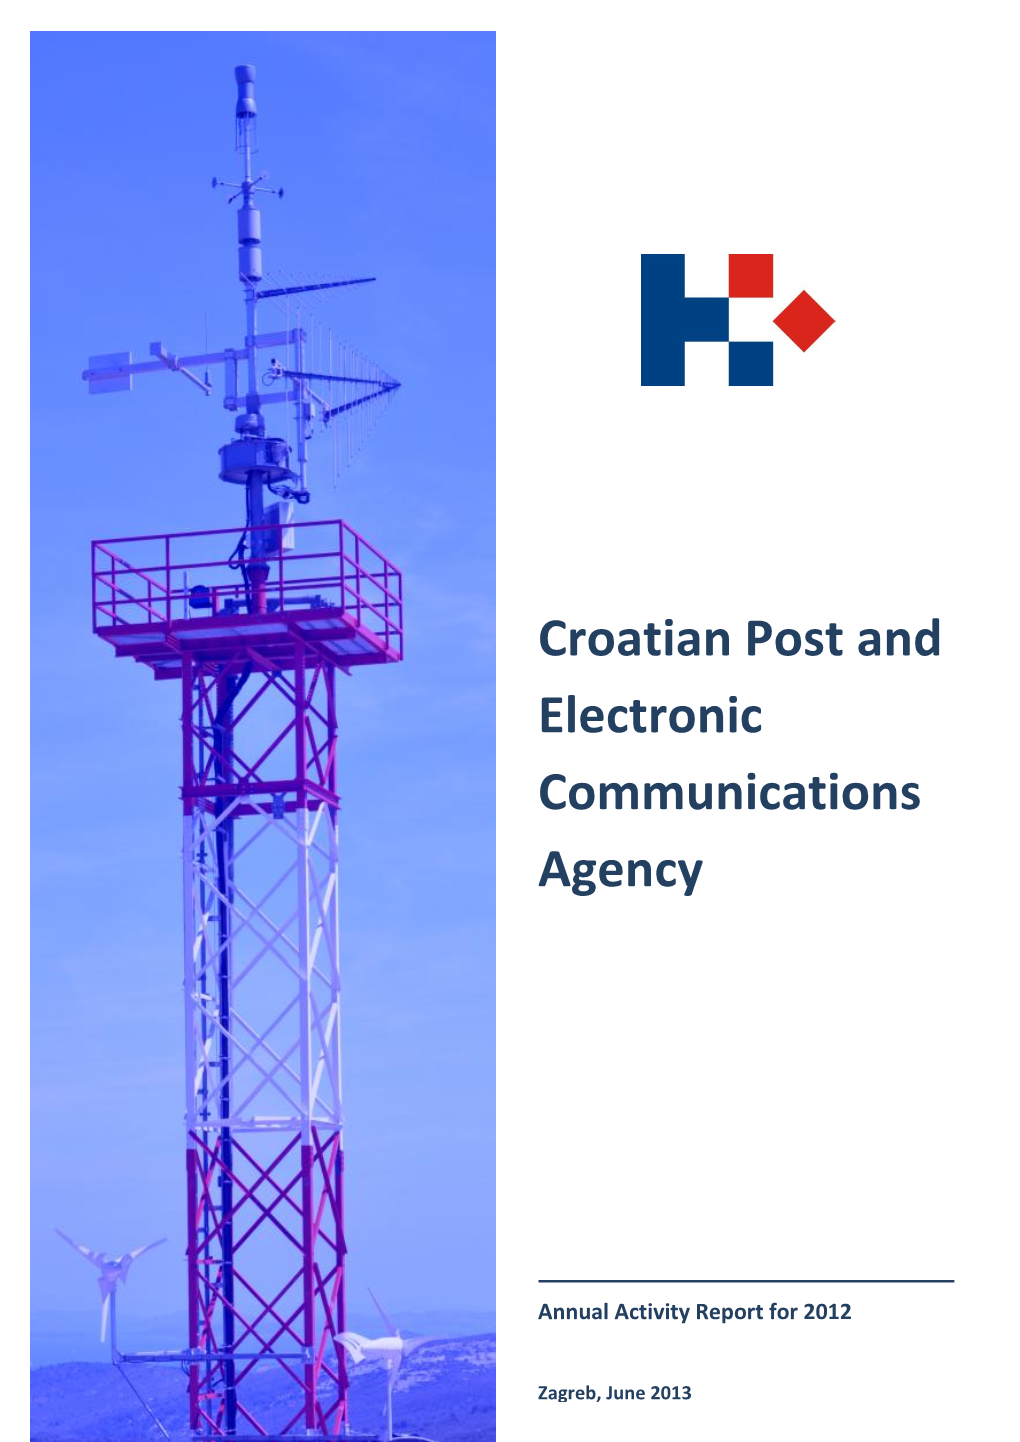 Croatian Post and Electronic Communications Agency